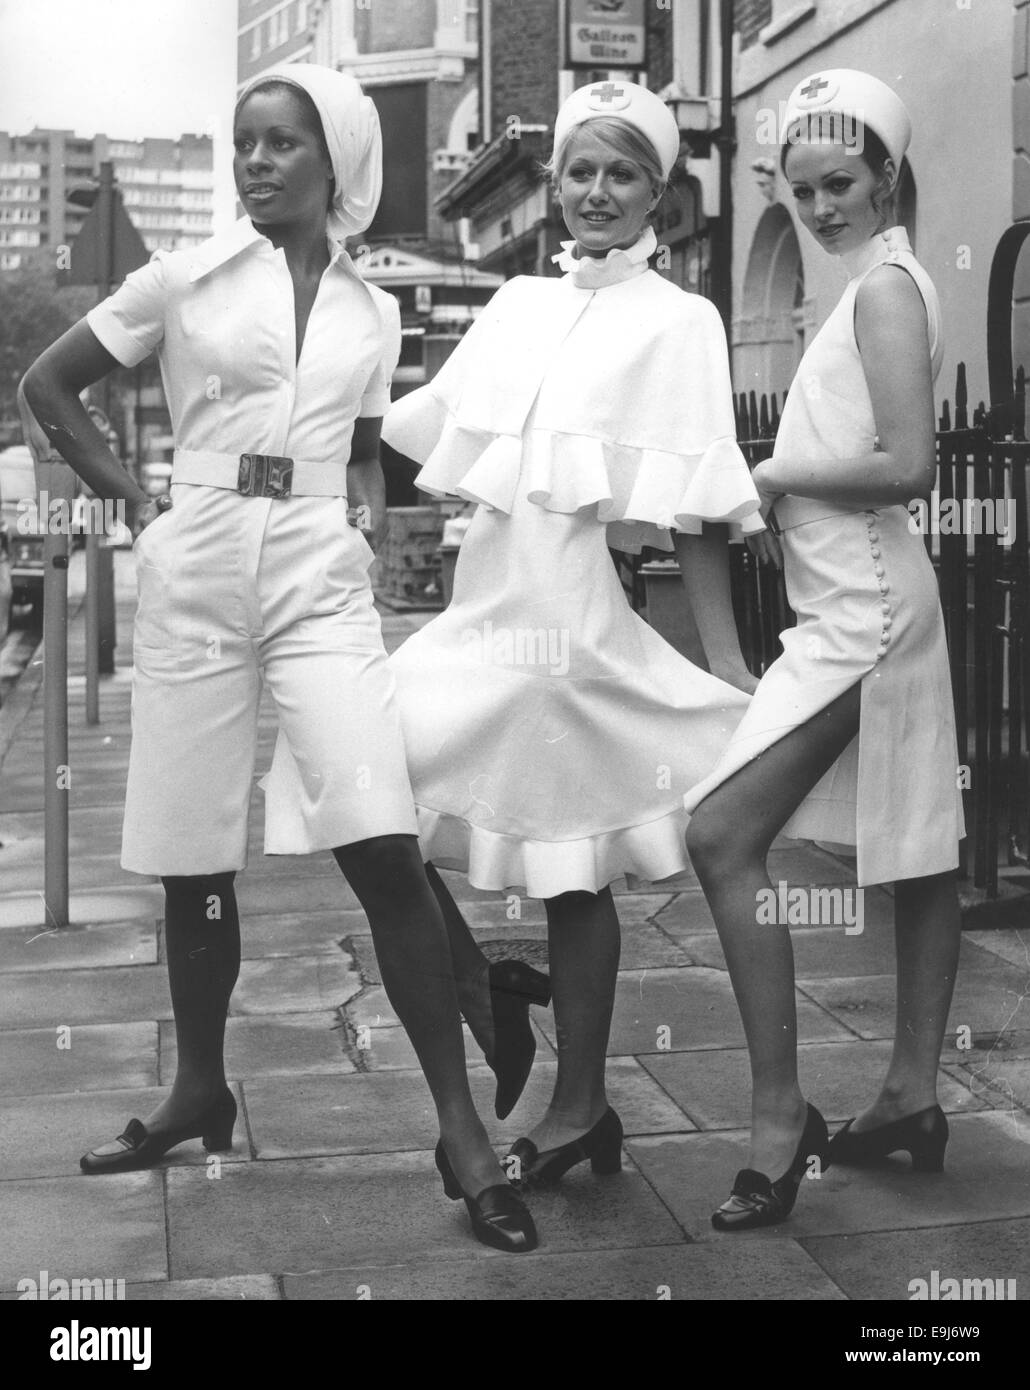 Sep 17, 1971 - London, England, United Kingdom - Jorn Langberg, designer of Christian Dior, London, has designed three new uniforms with the exclusive and feminine Dior look for nurses. They were on show at the London Nursing Exhibition at Seymour Hall. L-R CLAUDETTE wears a culotte in white drill with a long front zipper. HEIDI wears a frilly dress and cap in white cotton drill and MARION wears a sleeveless side buttoning culotte dress in white drill with a semi-discreet and functional slit at the side. Drill is stout durable cotton fabric with a strong bias (diagonal) in the weave. Light wei Stock Photo